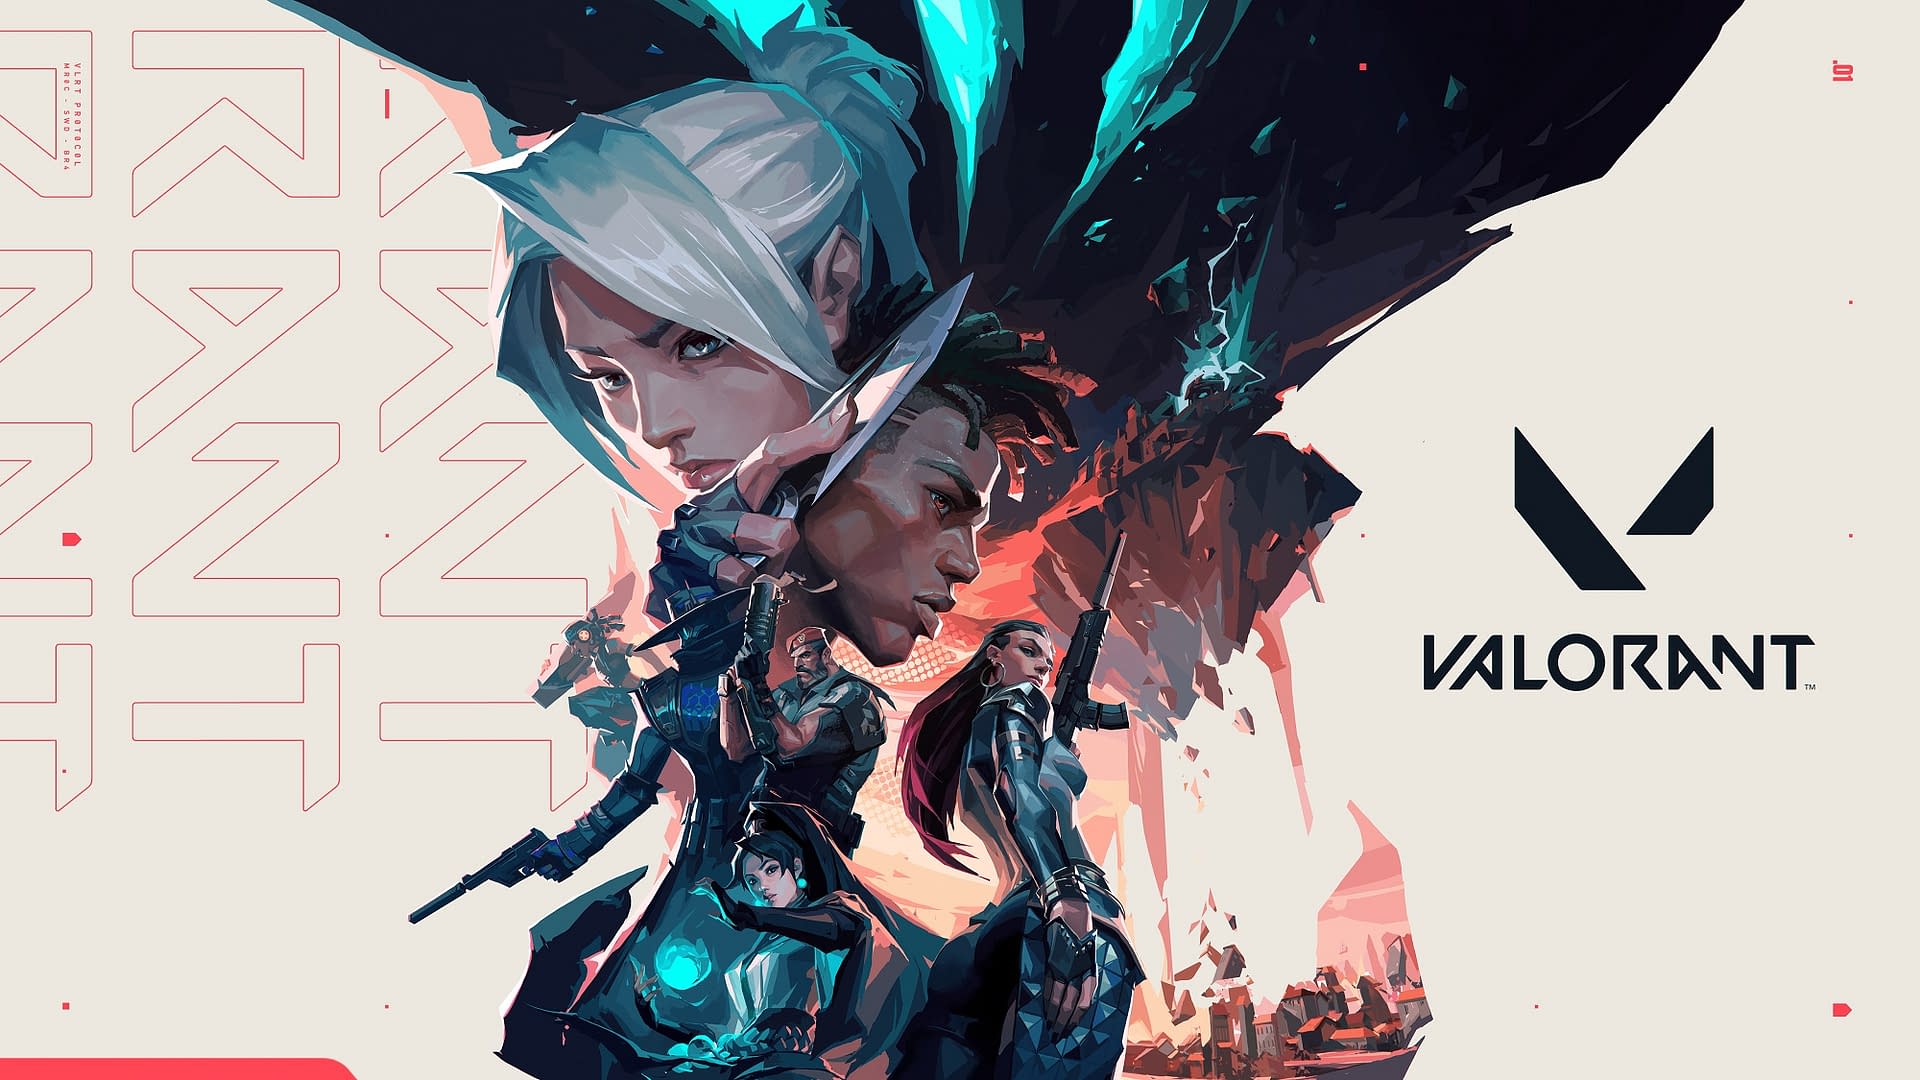 Valorant Updates on X: To celebrate the release of our New